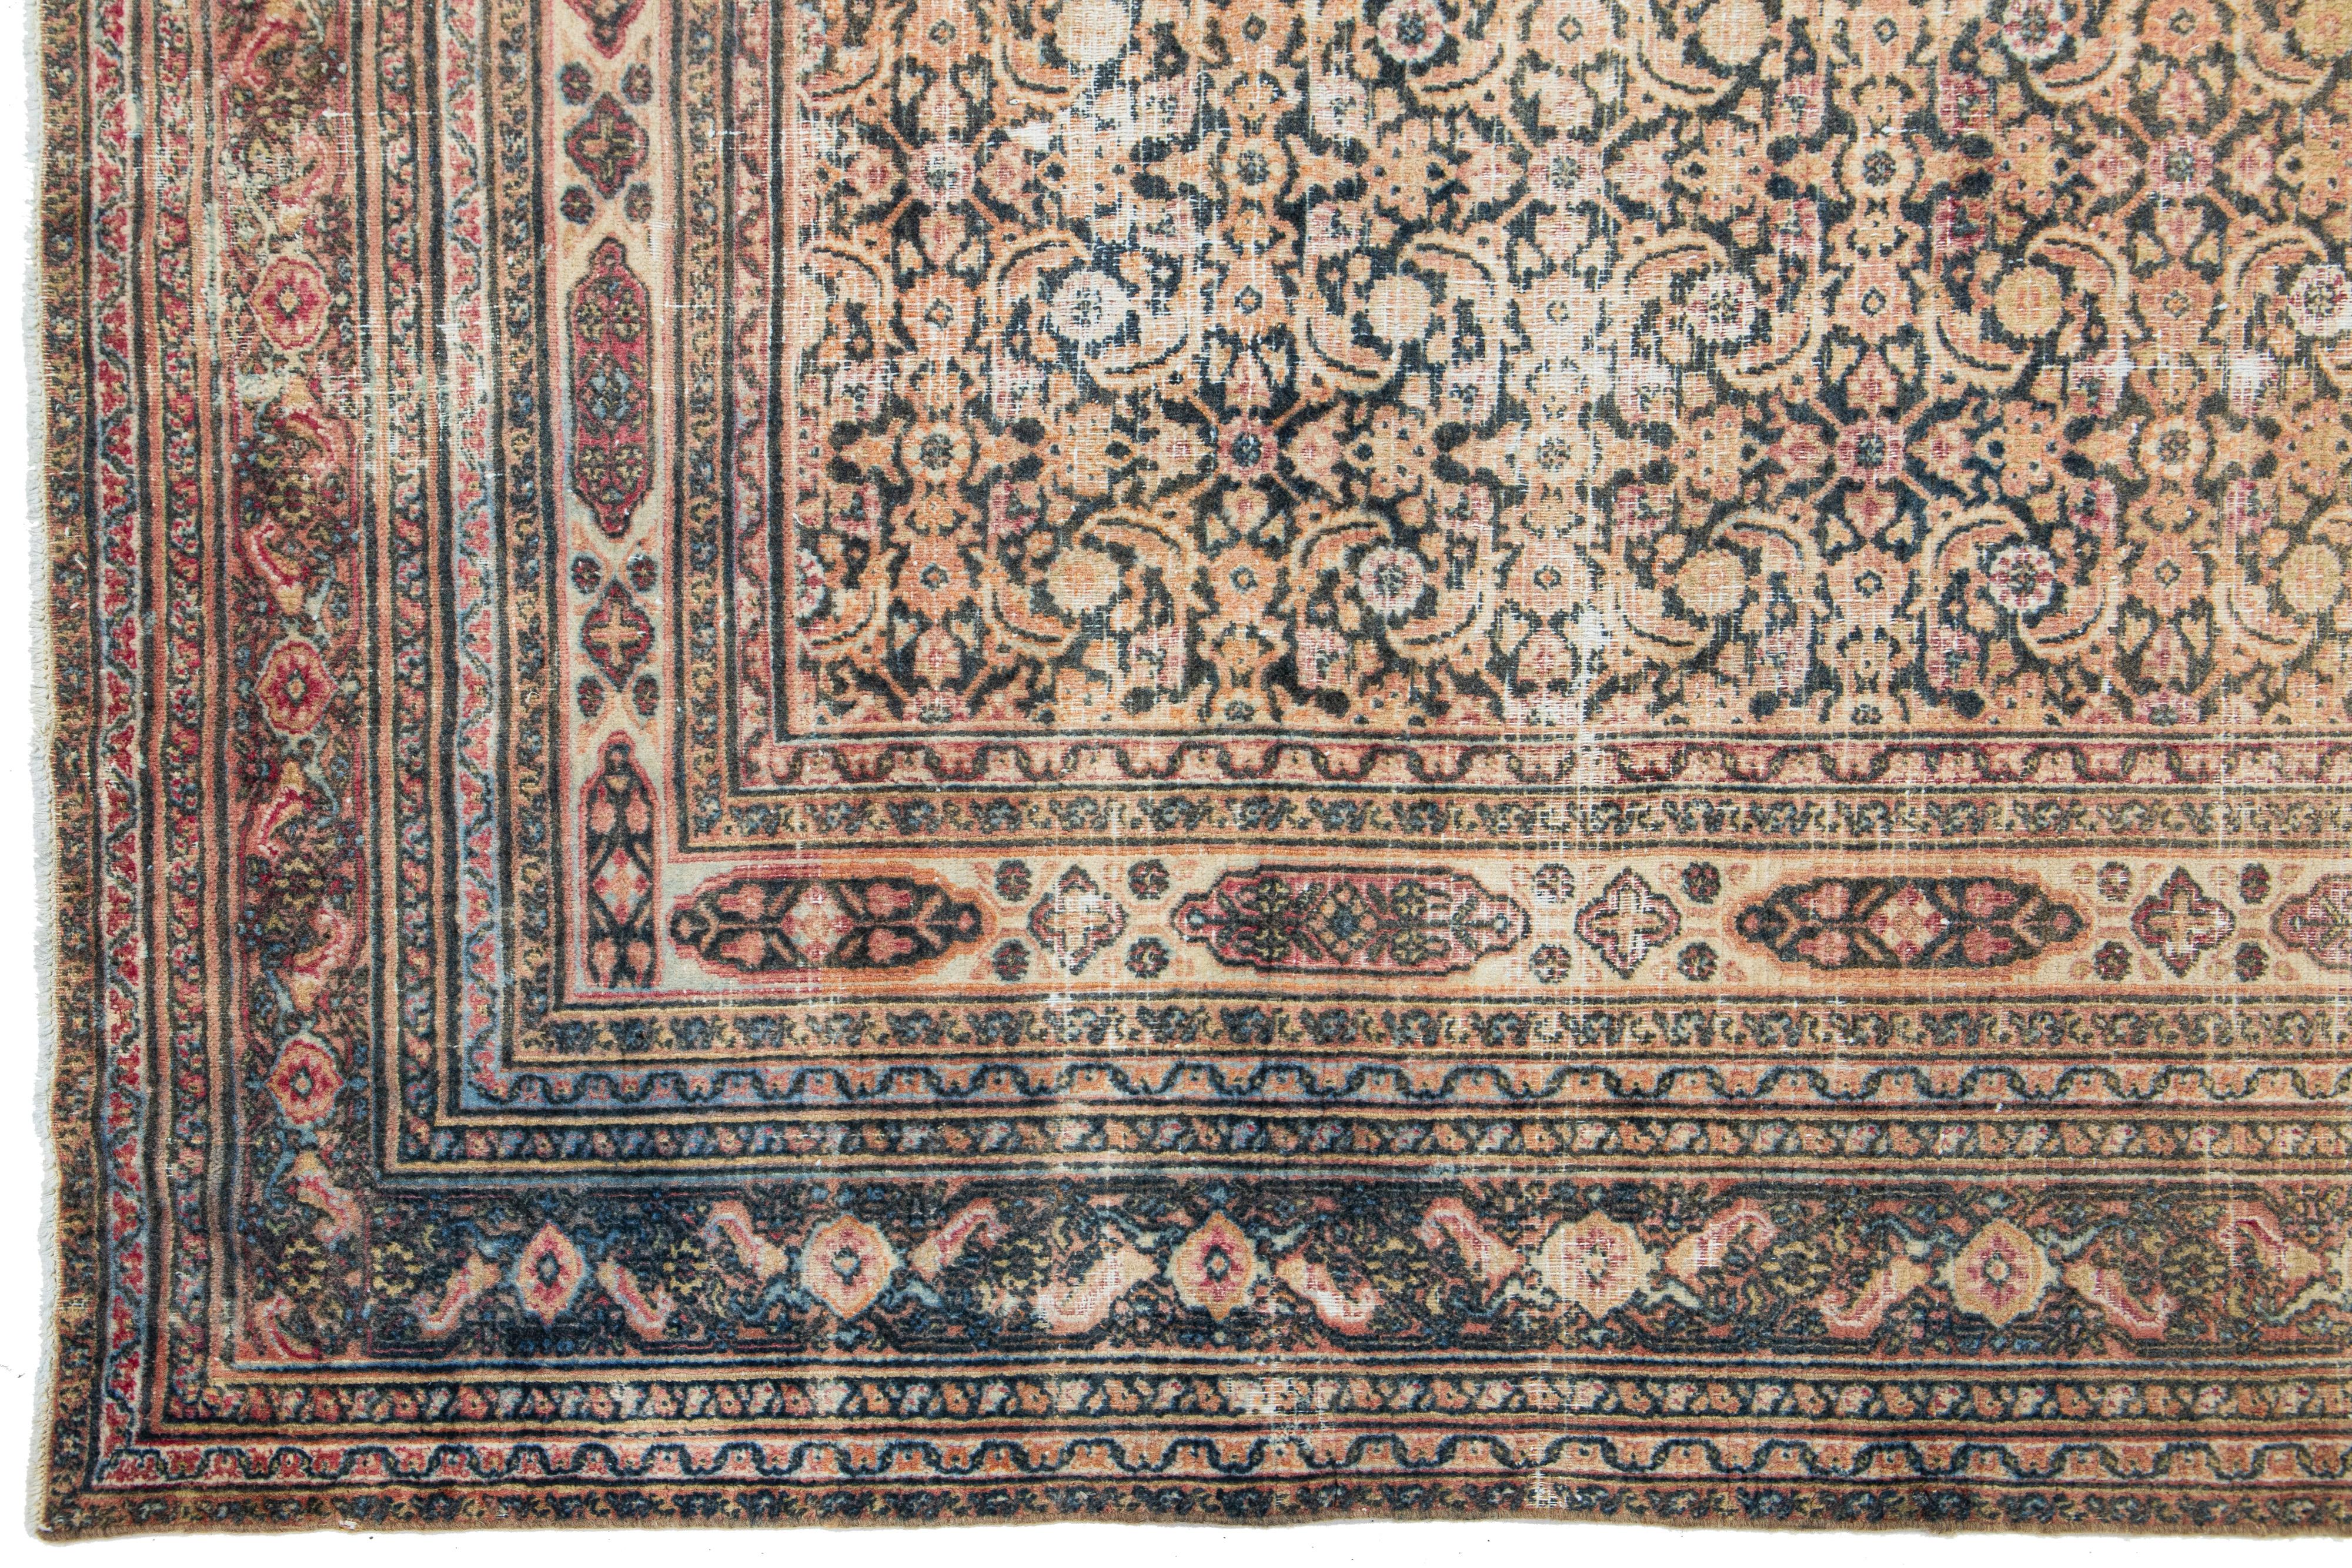 20th Century  1900s Antique Wool Rug Persian Tabriz In Rust With Floral Pattern  For Sale